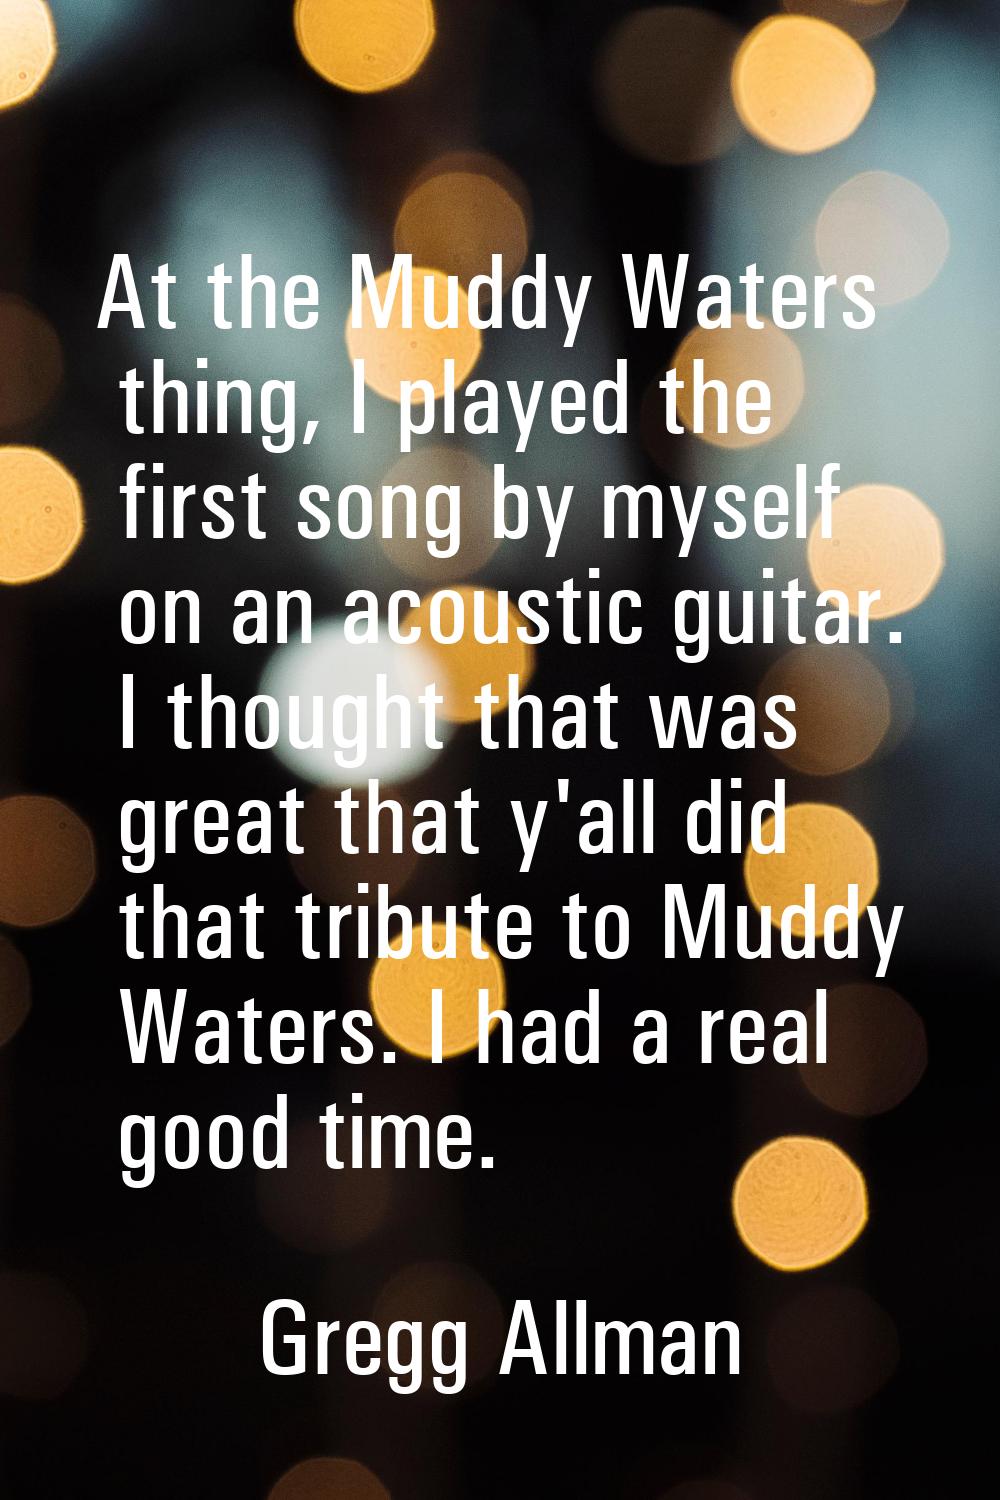 At the Muddy Waters thing, I played the first song by myself on an acoustic guitar. I thought that 